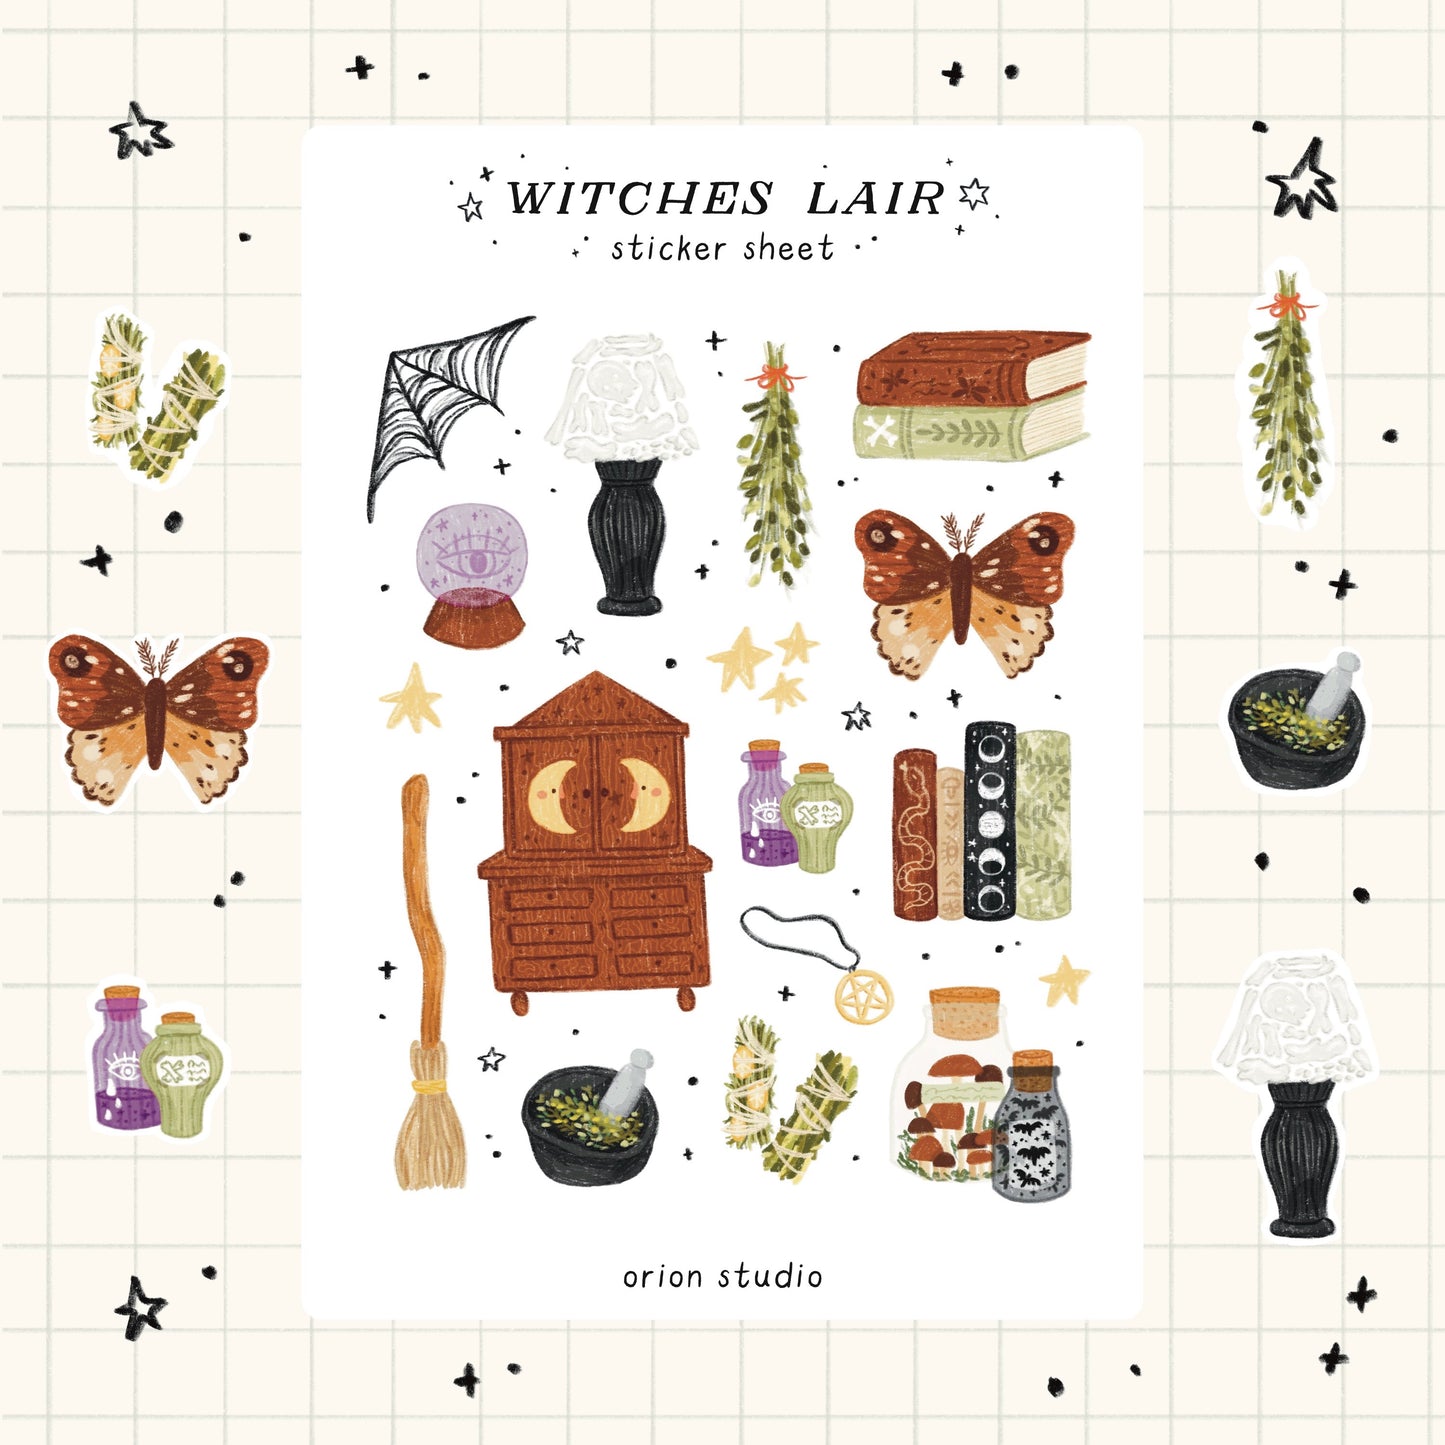 'WITCHES LAIR' sticker sheet